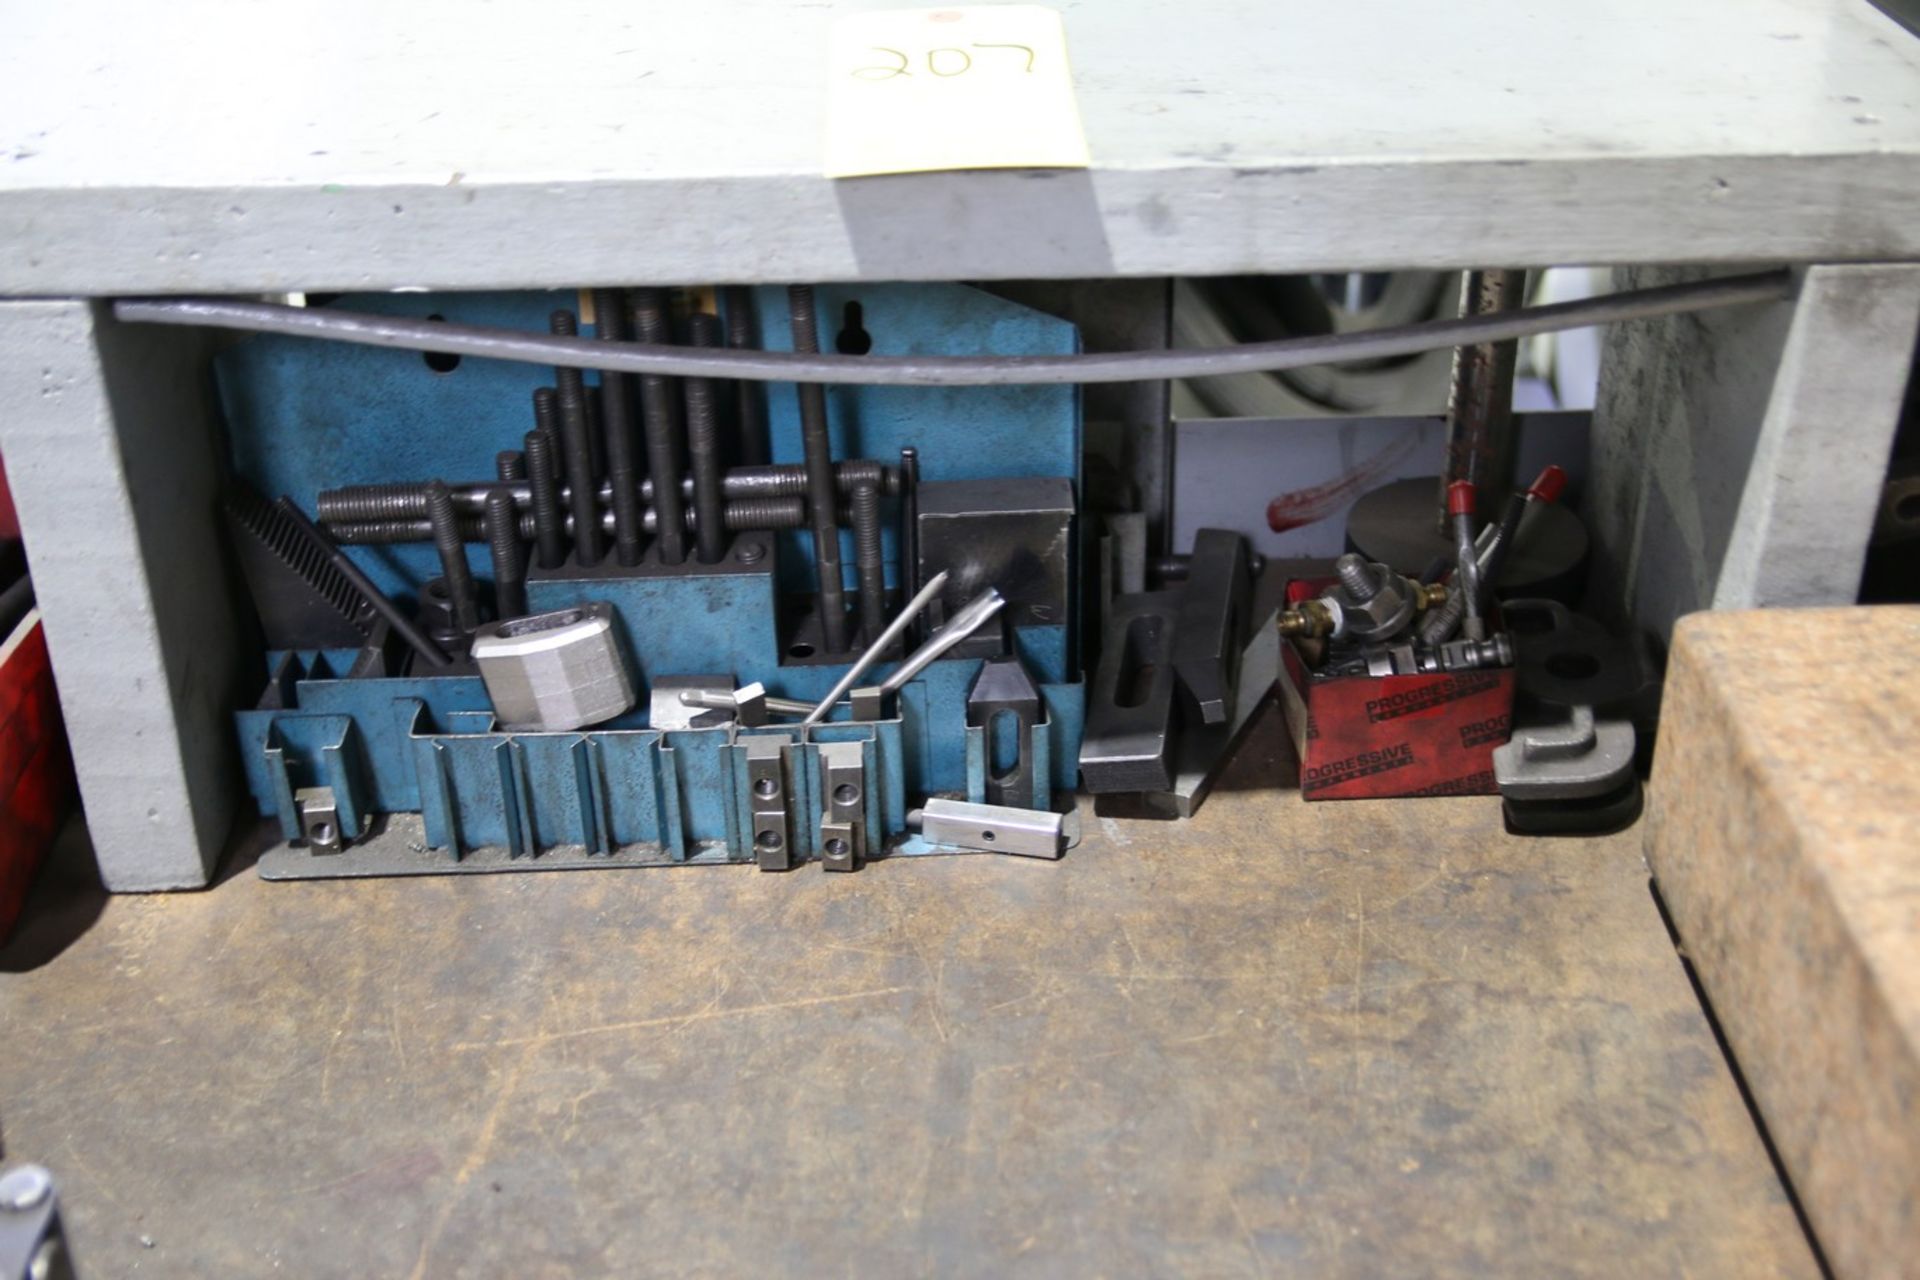 Steel Work Bench with Contents Contents Include Setup Tooling, Misc. Hardware and Small Magnetic - Image 3 of 4